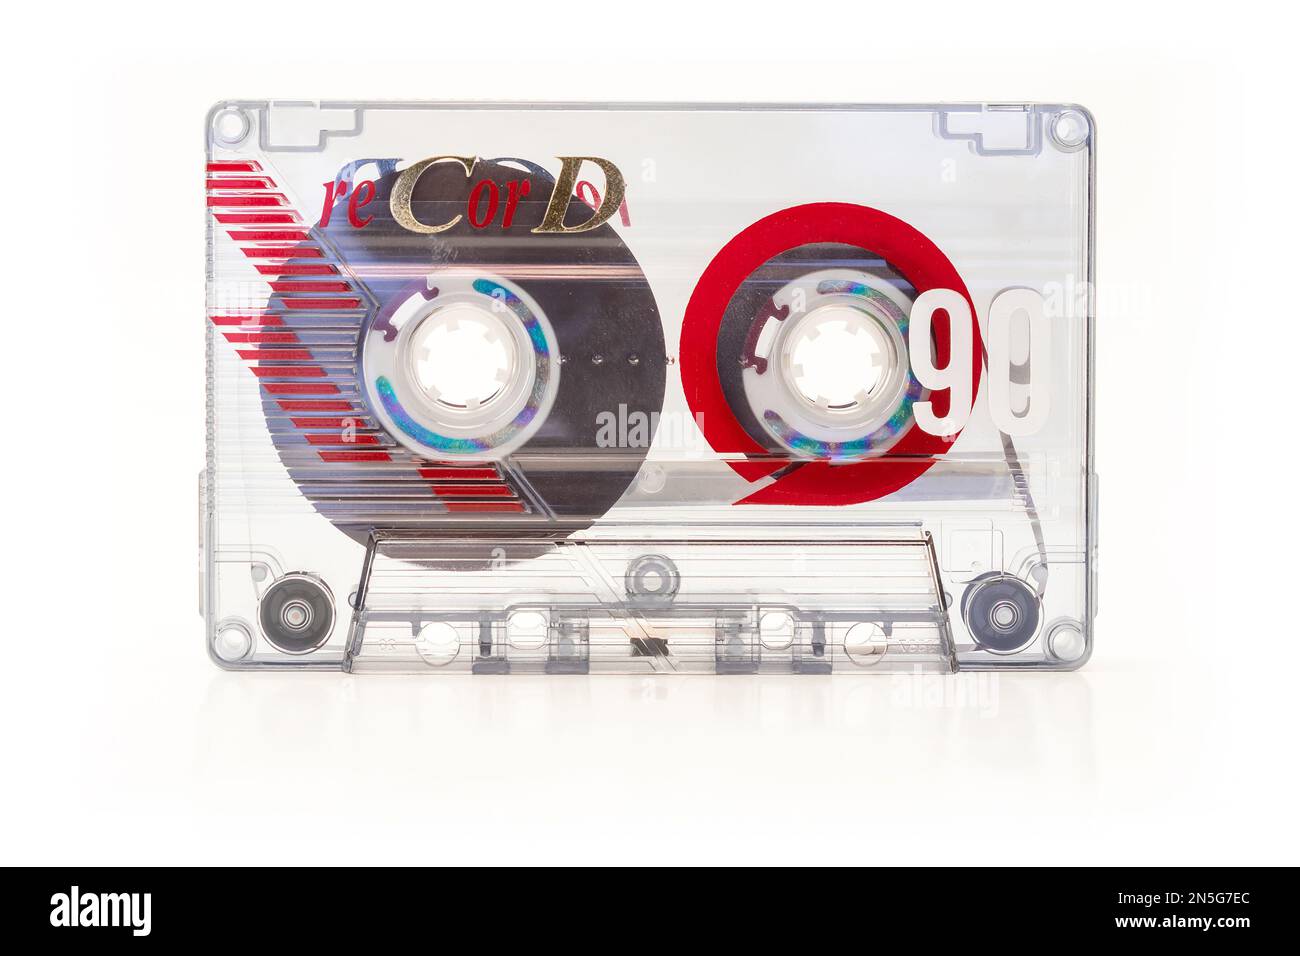 Audio cassette tape - old vintage compact audio cassette isolated on white background Stock Photo